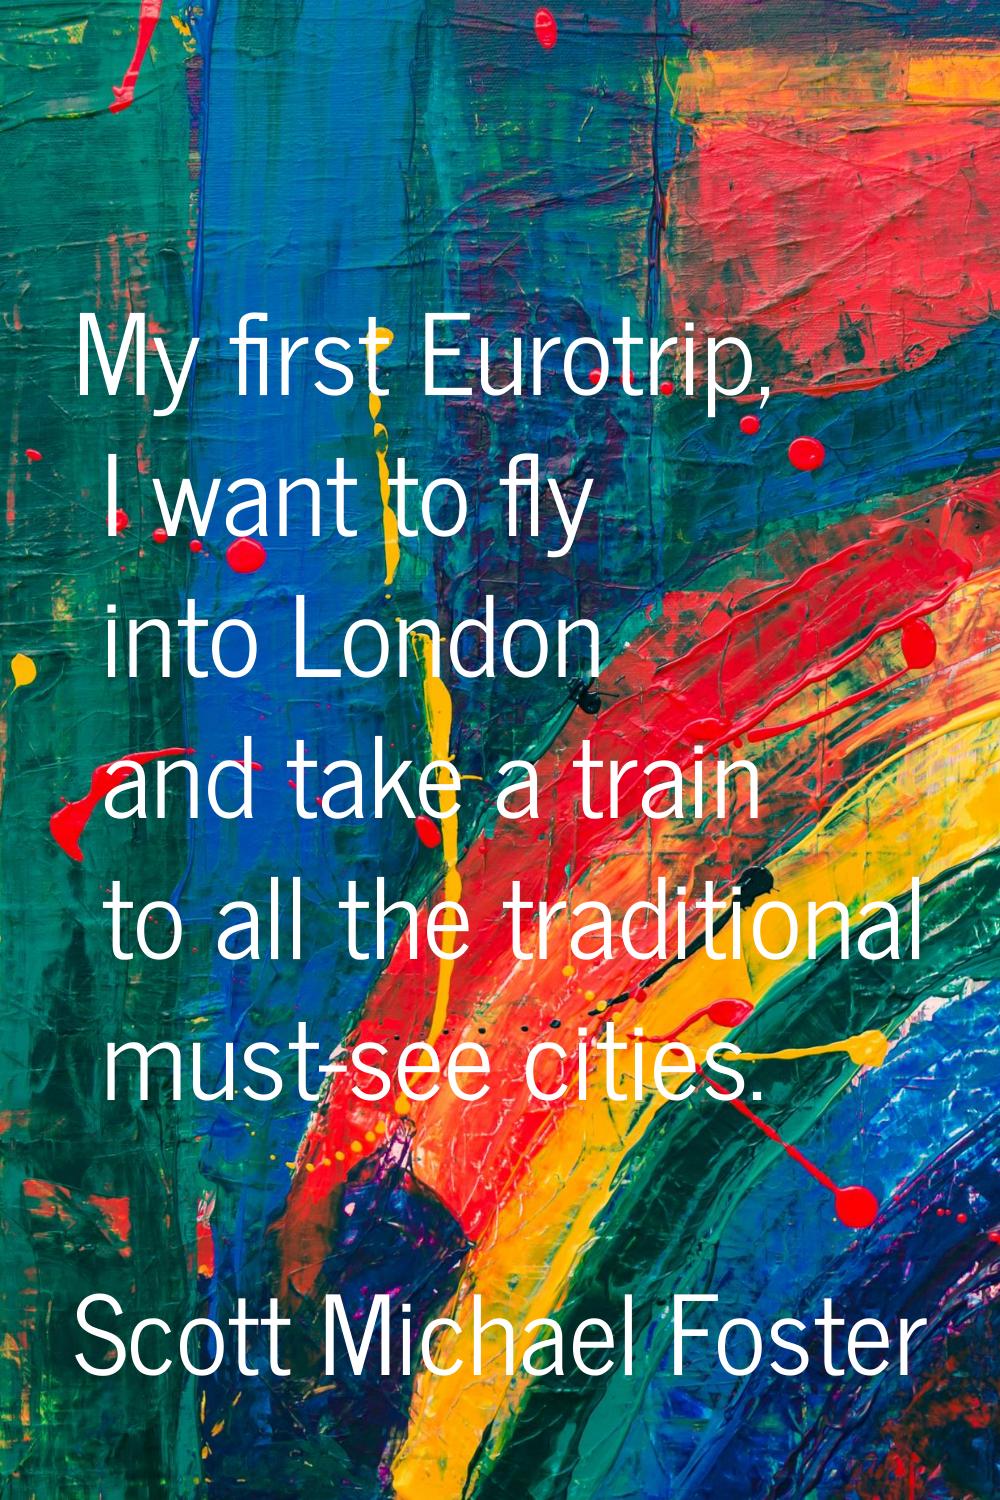 My first Eurotrip, I want to fly into London and take a train to all the traditional must-see citie